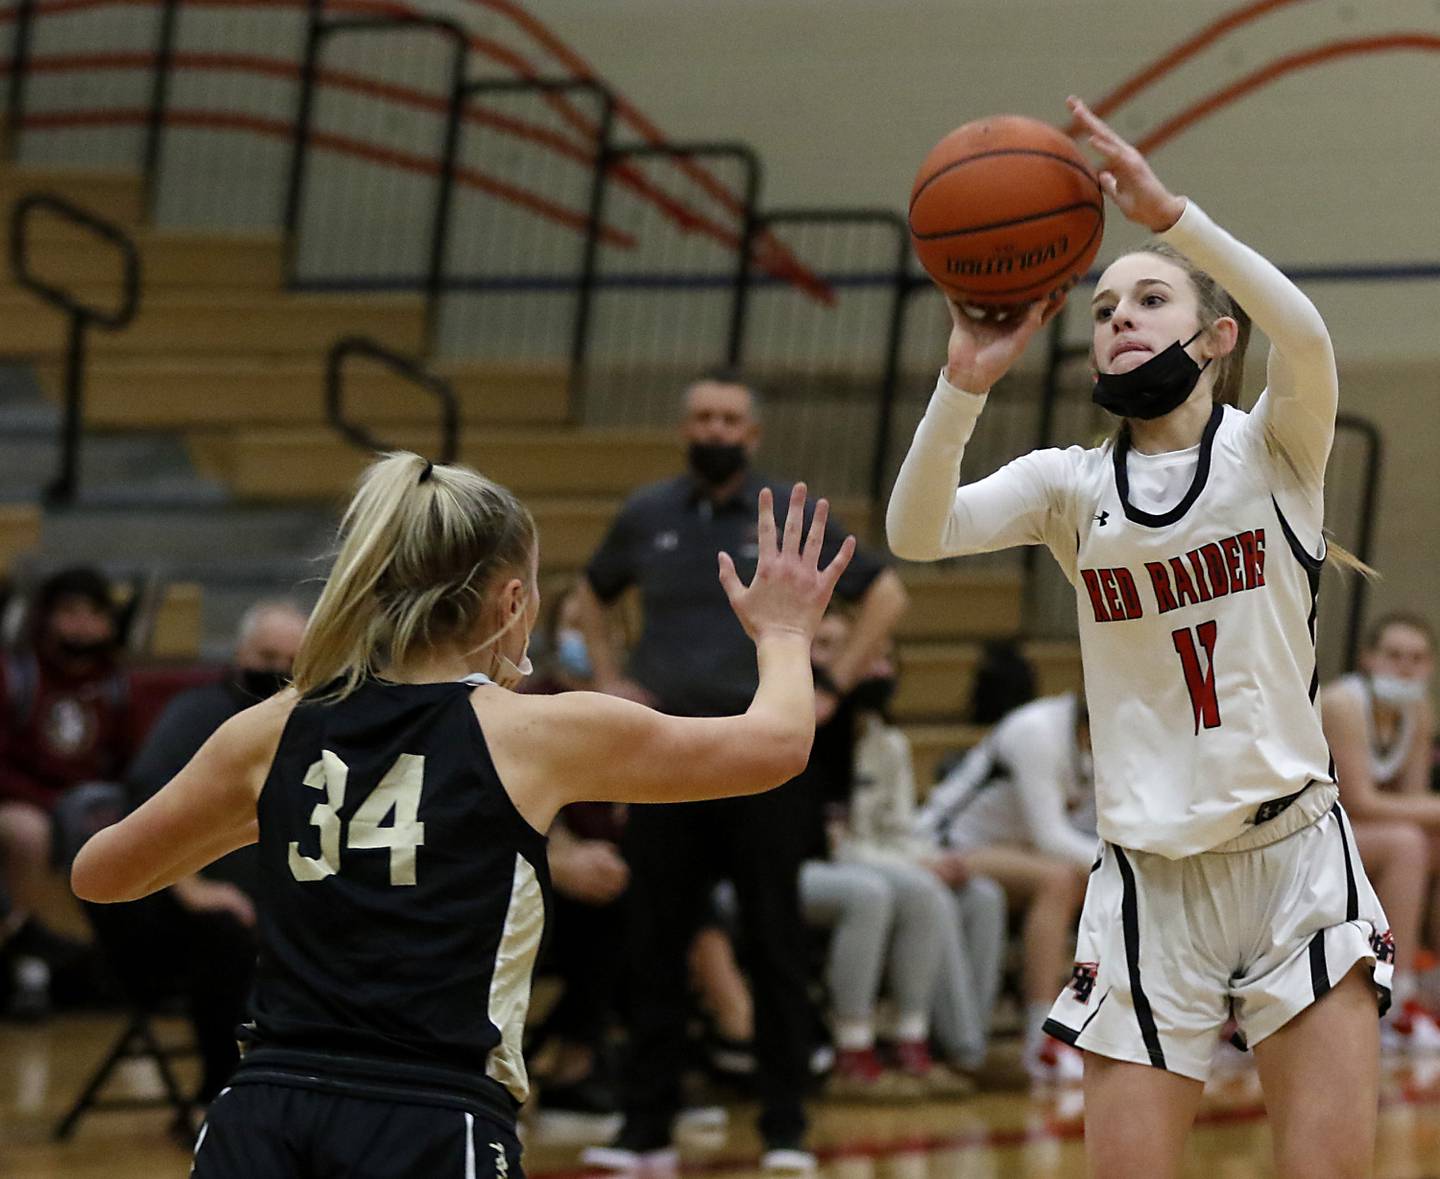 Huntley’s Anna Campanelli shoots over Sycamore’s Reese Hill during a non-conference basketball game Monday evening, Jan. 24, 2022, between Sycamore and Huntley at Huntley High School.